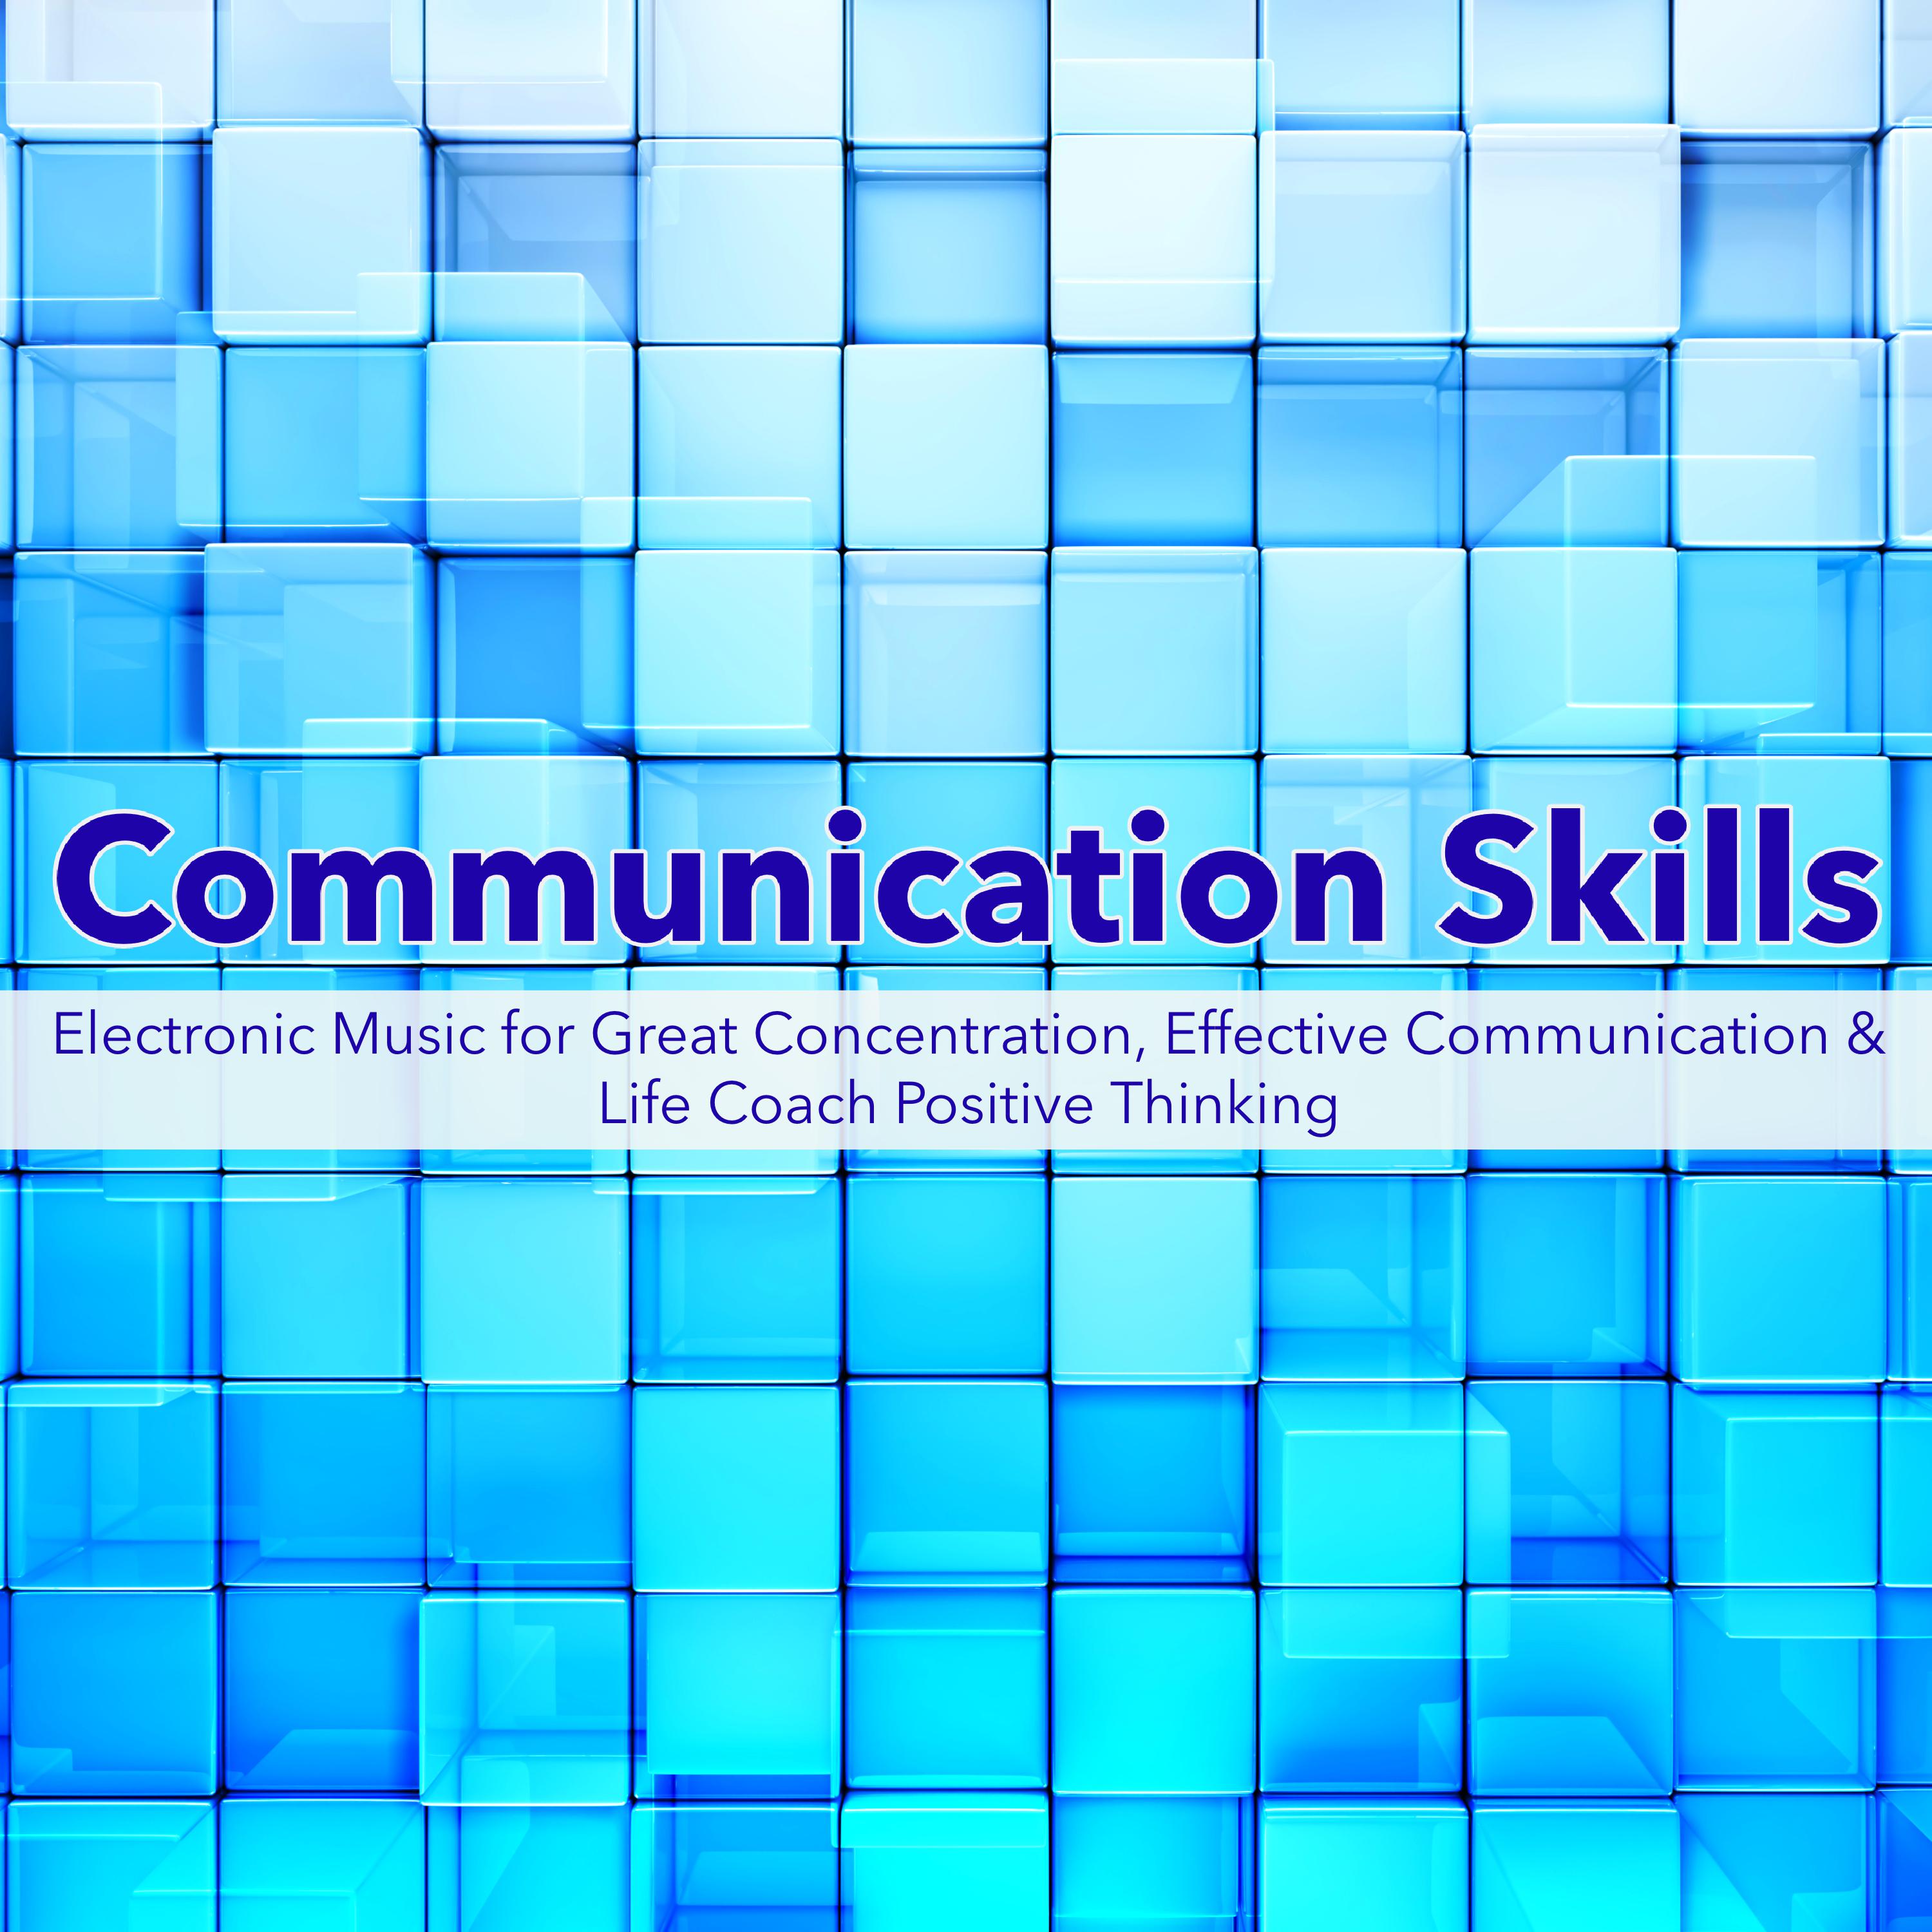 Communication Skills – Electronic Music for Great Concentration, Effective Communication & Life Coach Positive Thinking